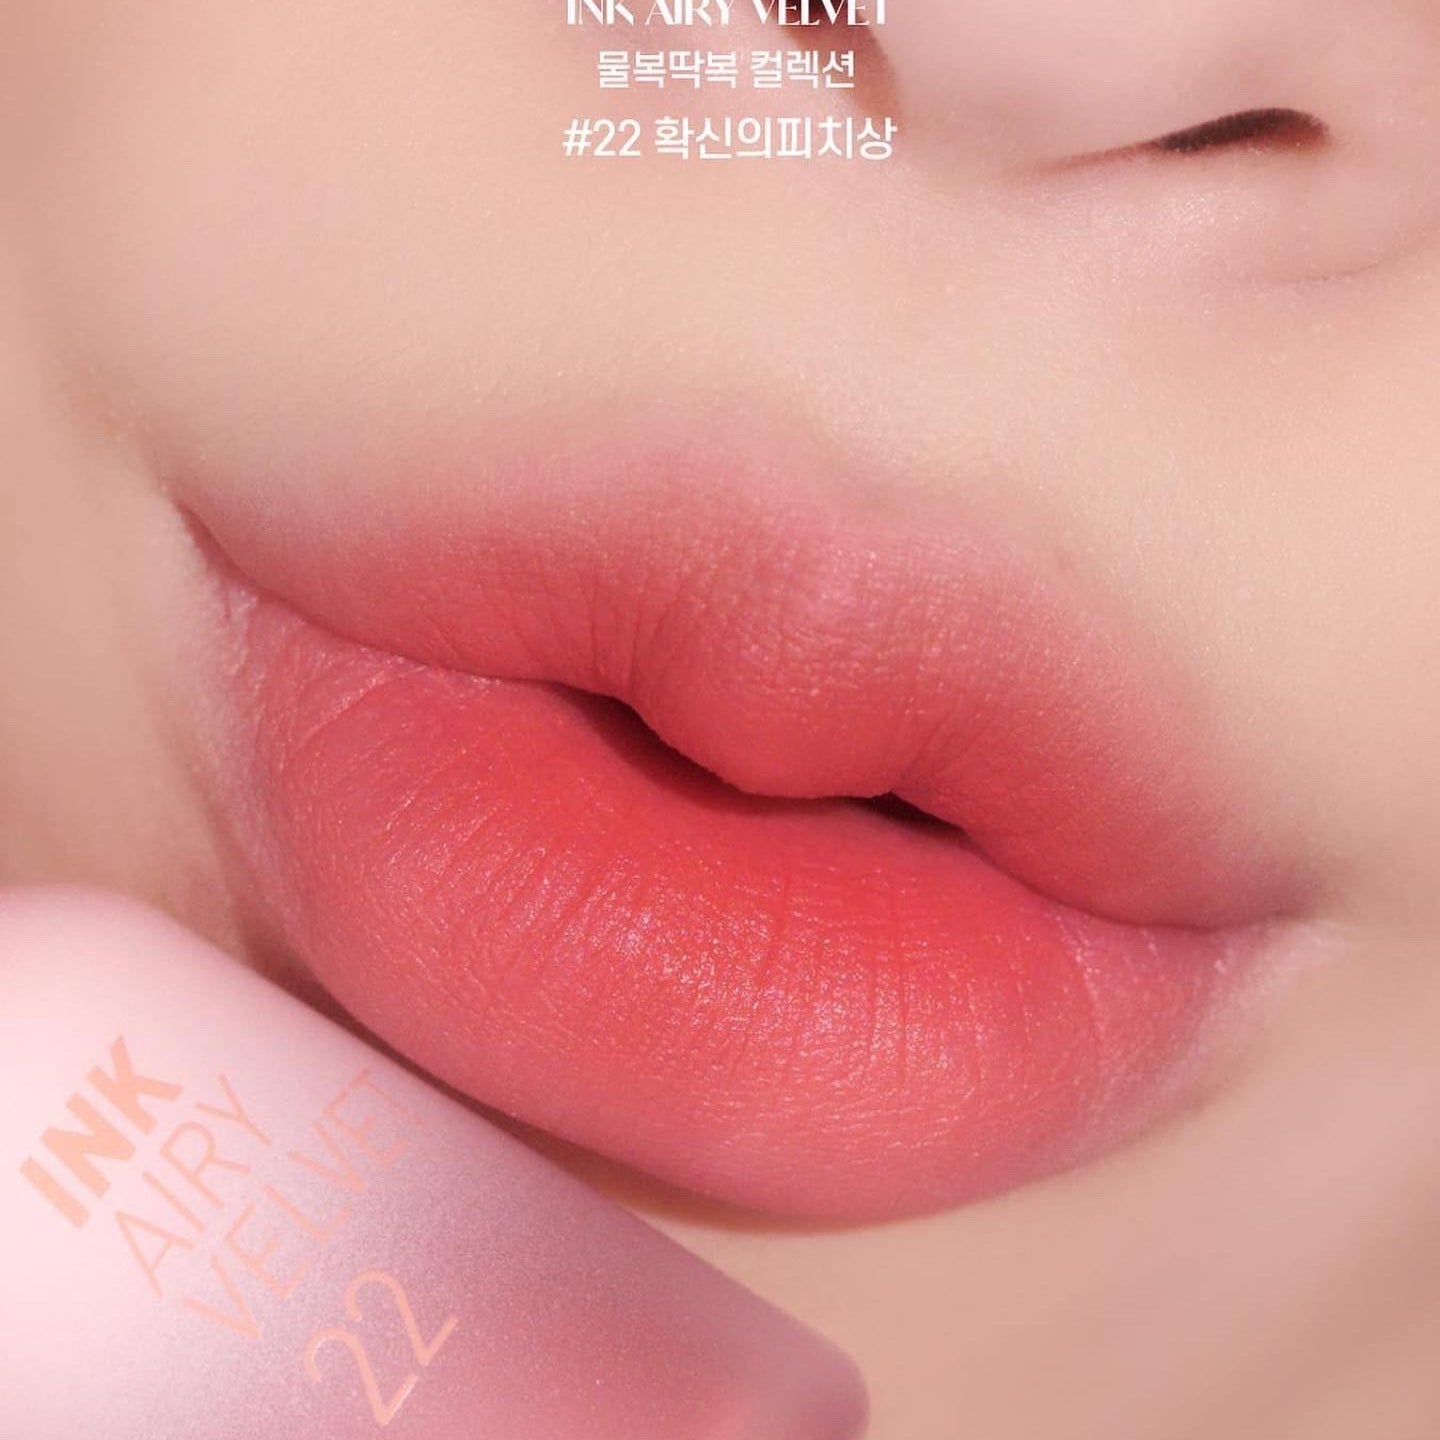 Ink airy velvet tint peaches collection